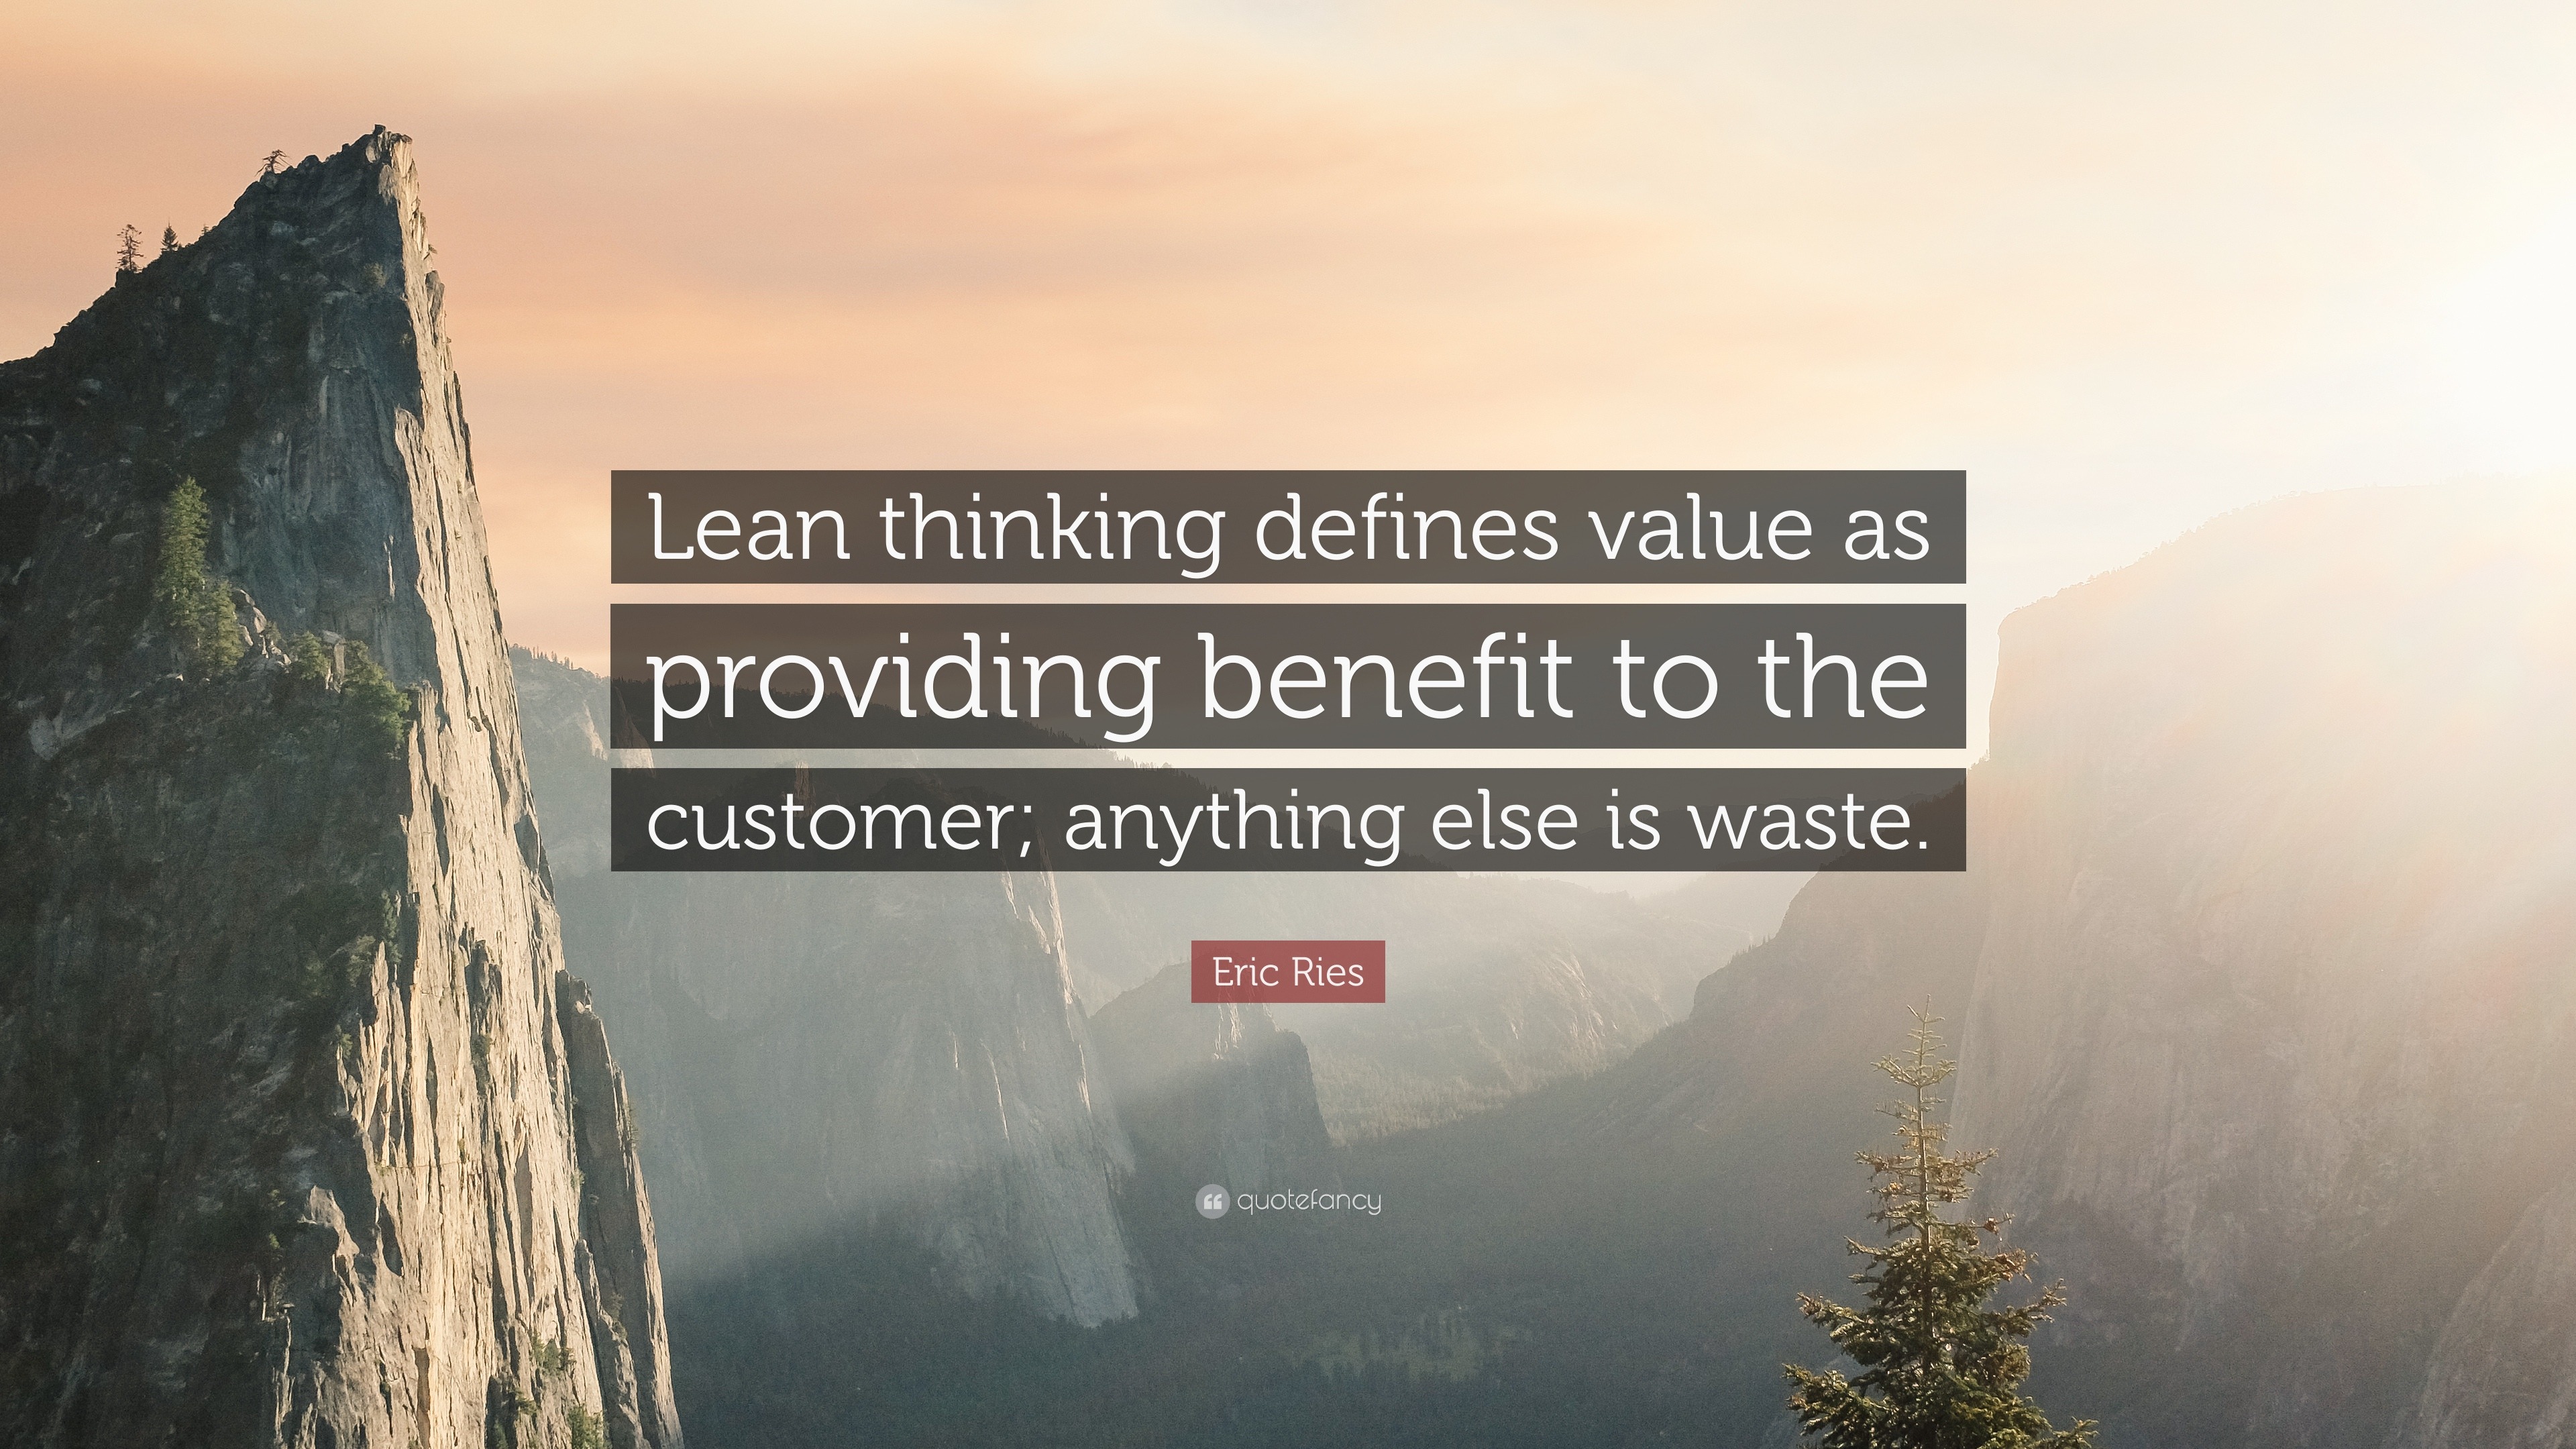 Eric Ries Quote: “Lean thinking defines value as providing benefit to